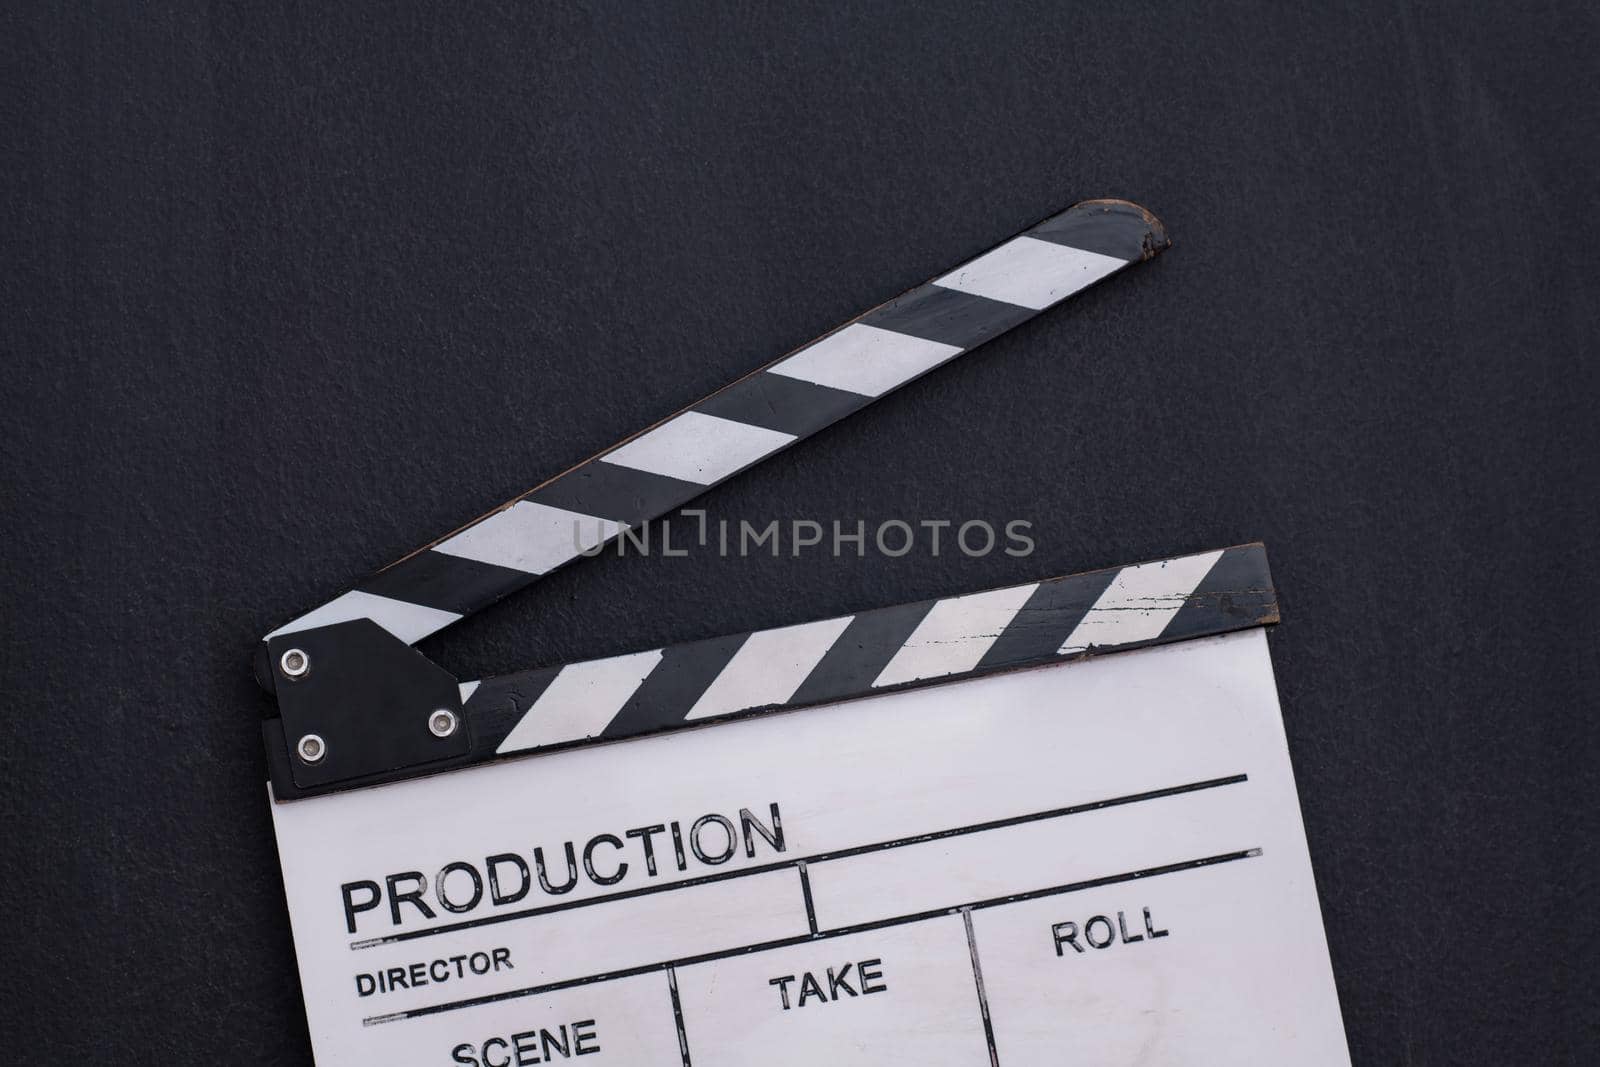 video production movie clapper cinema action and cut concept on balck chalkboard background